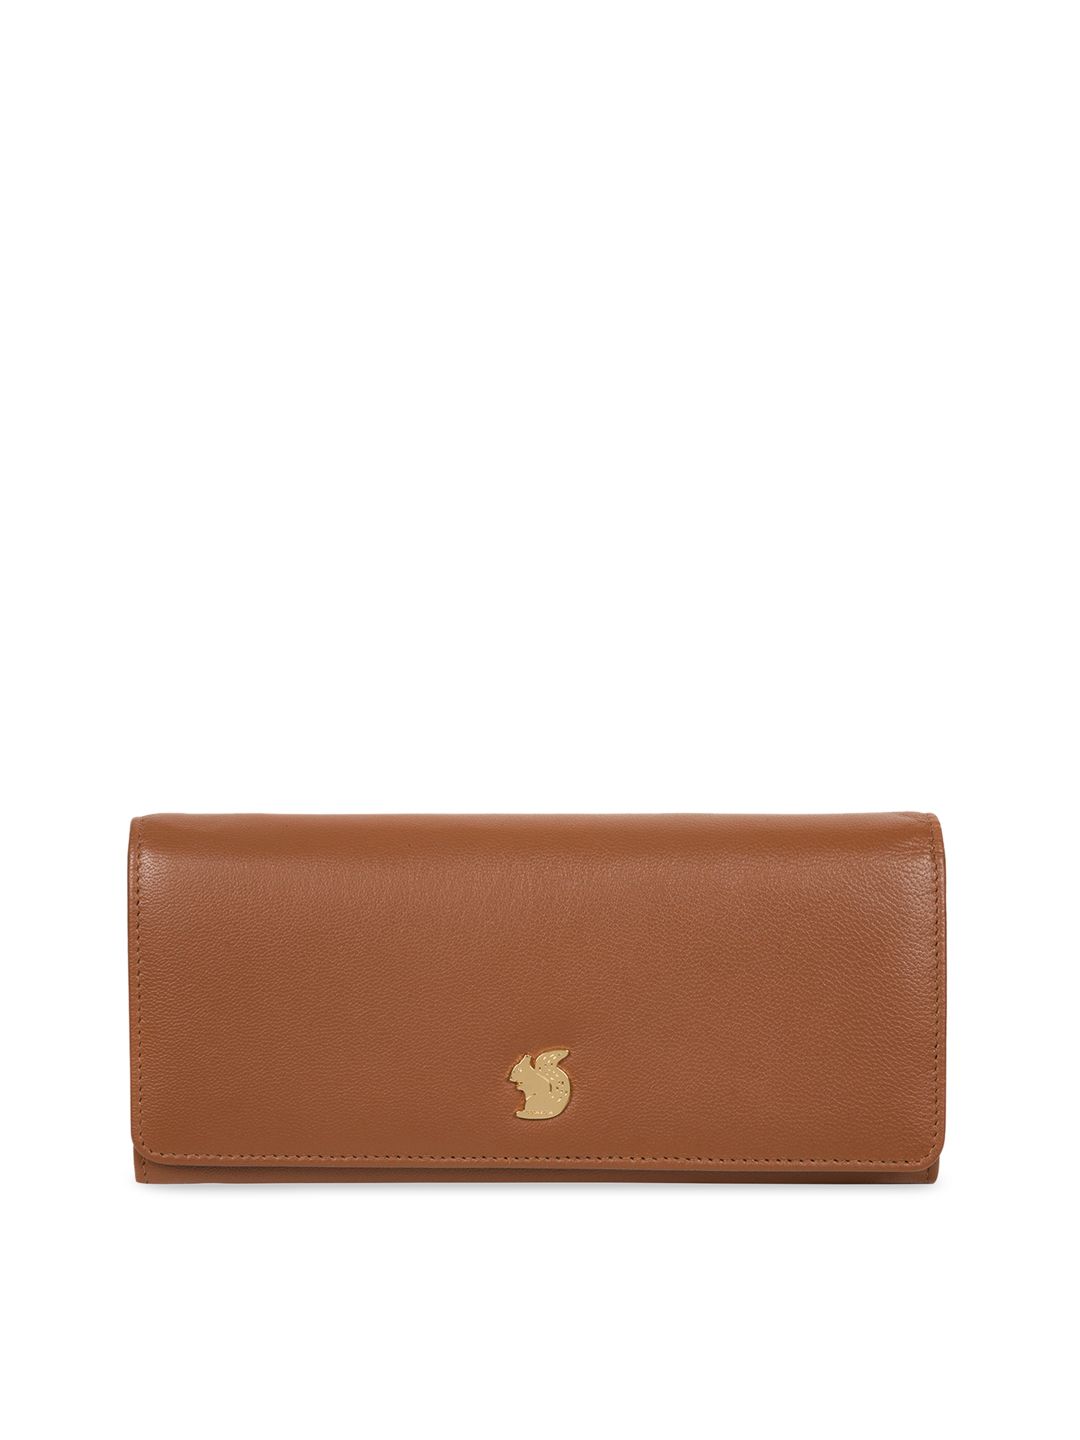 PURE LUXURIES LONDON Women Tan Brown Textured Genuine Leather Weisz Wallet Price in India